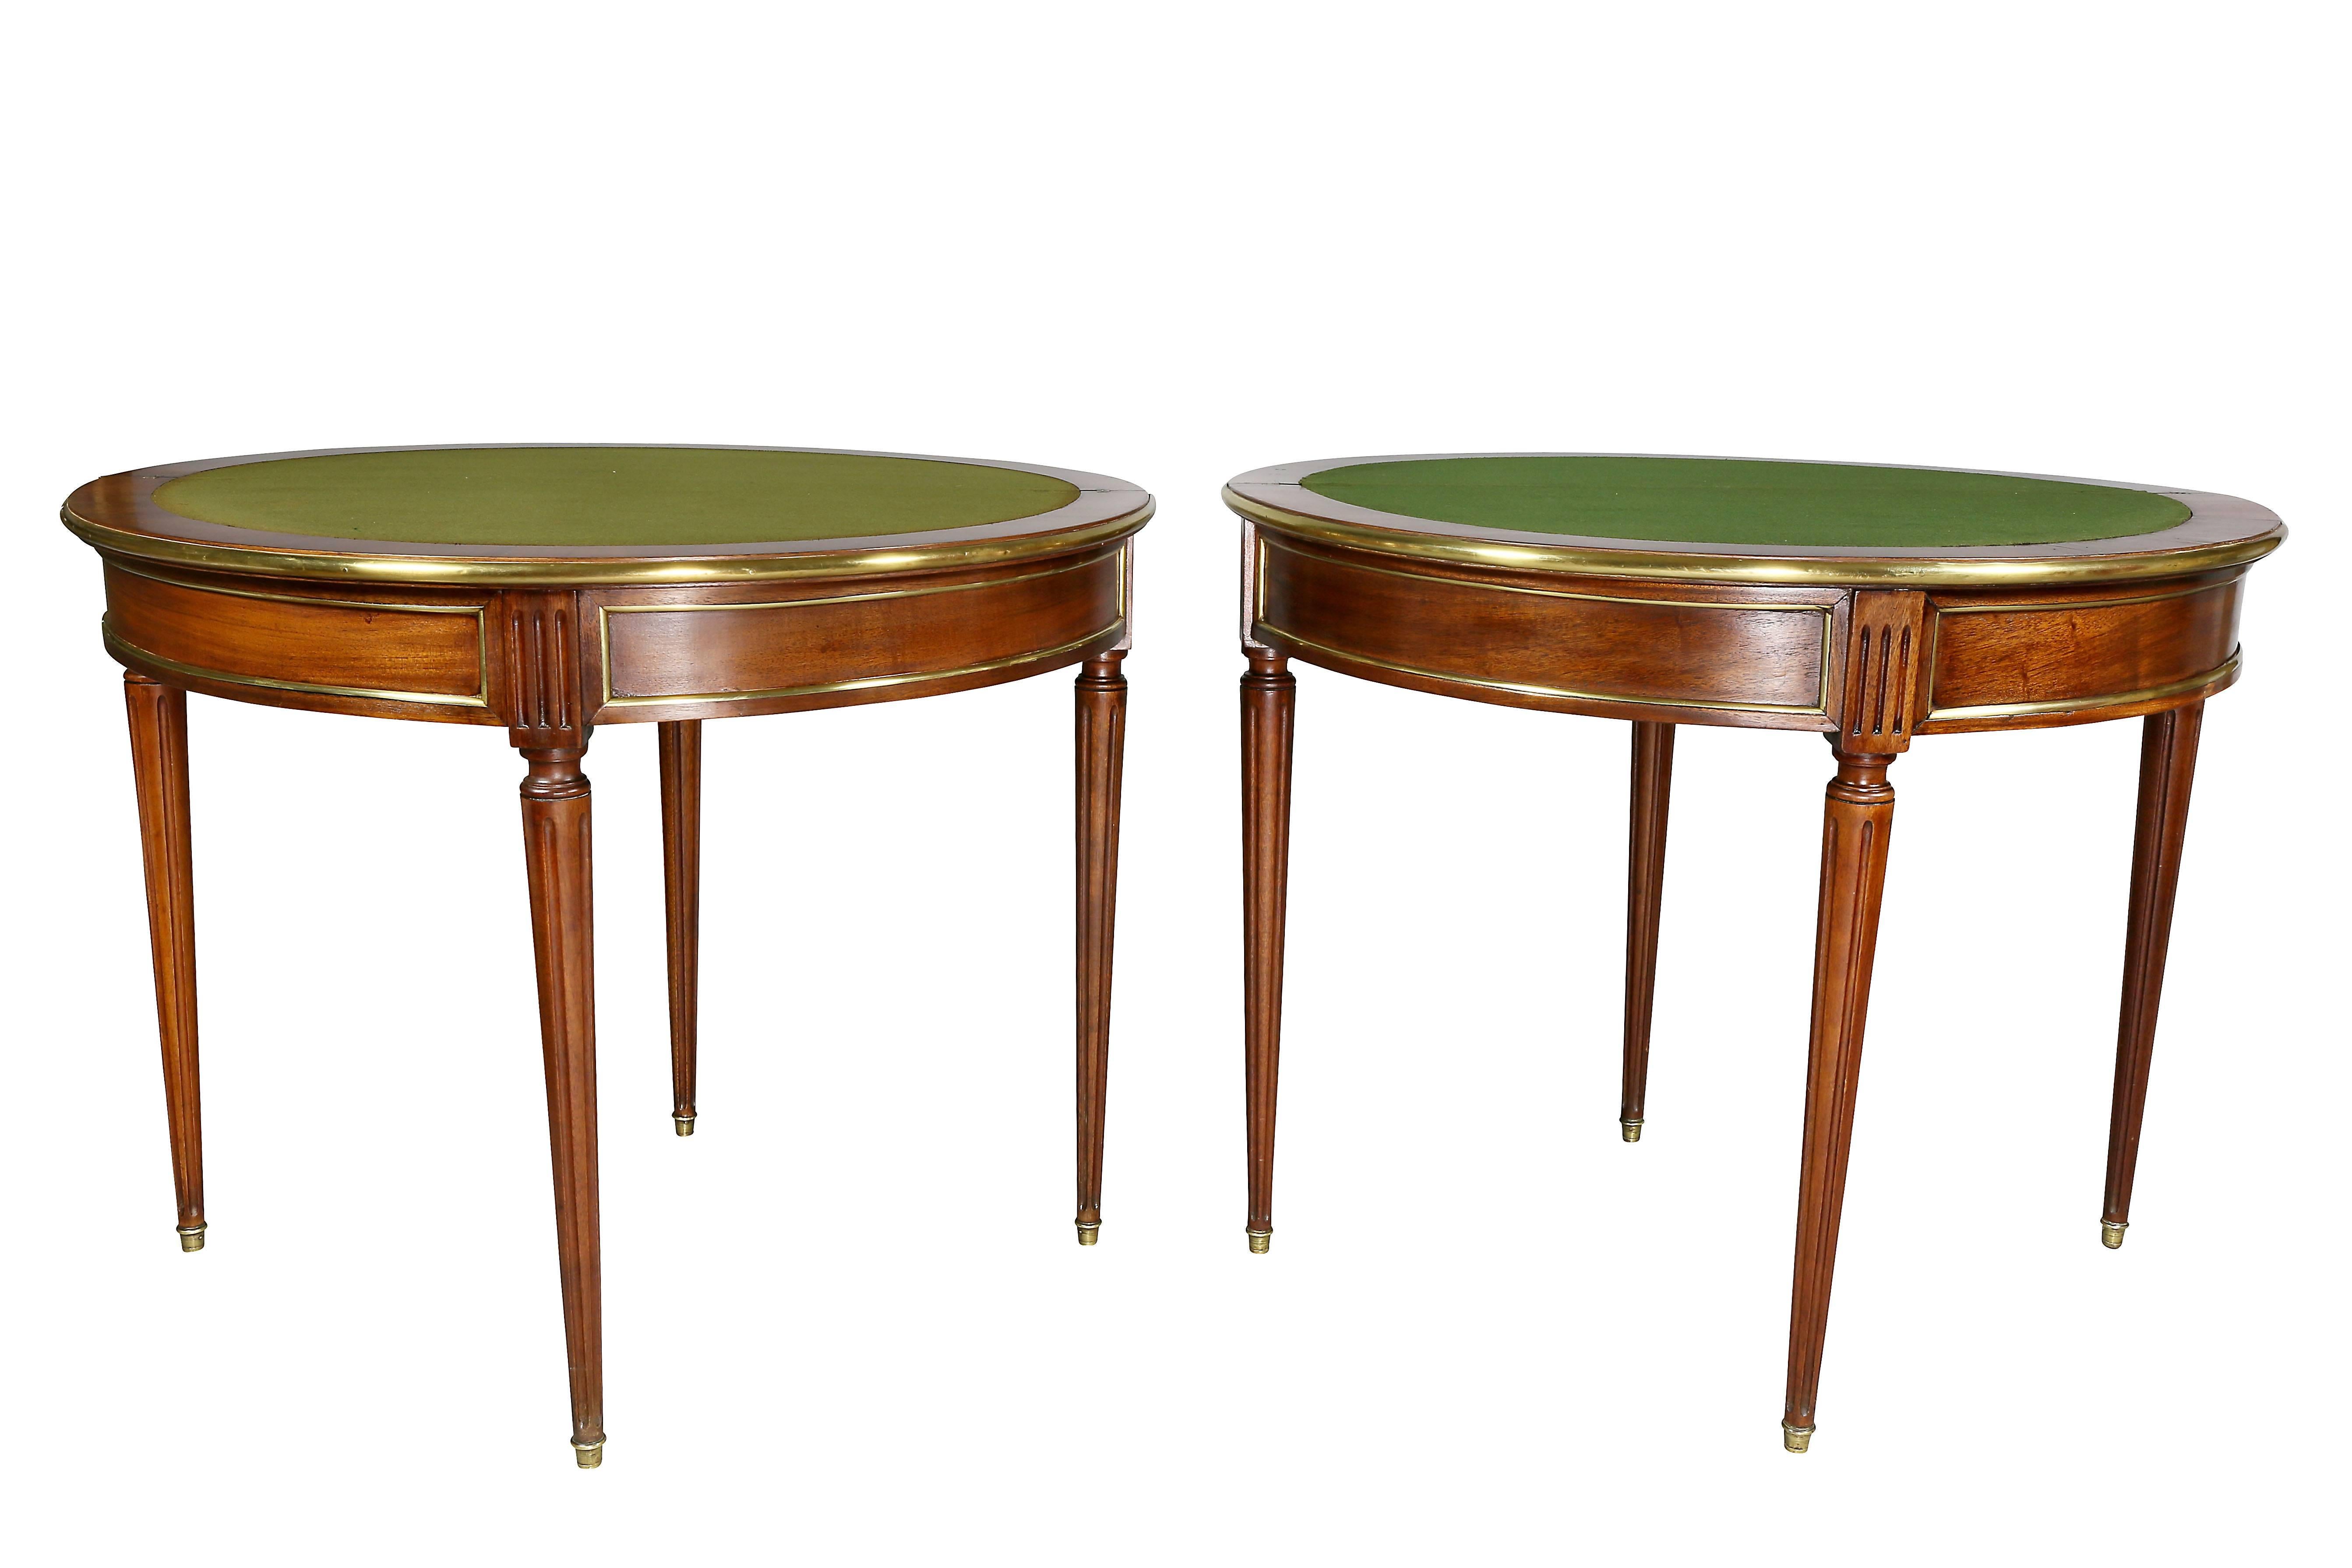 Late 19th Century Pair of Directoire Style Mahogany and Brass-Mounted Console/Games Tables